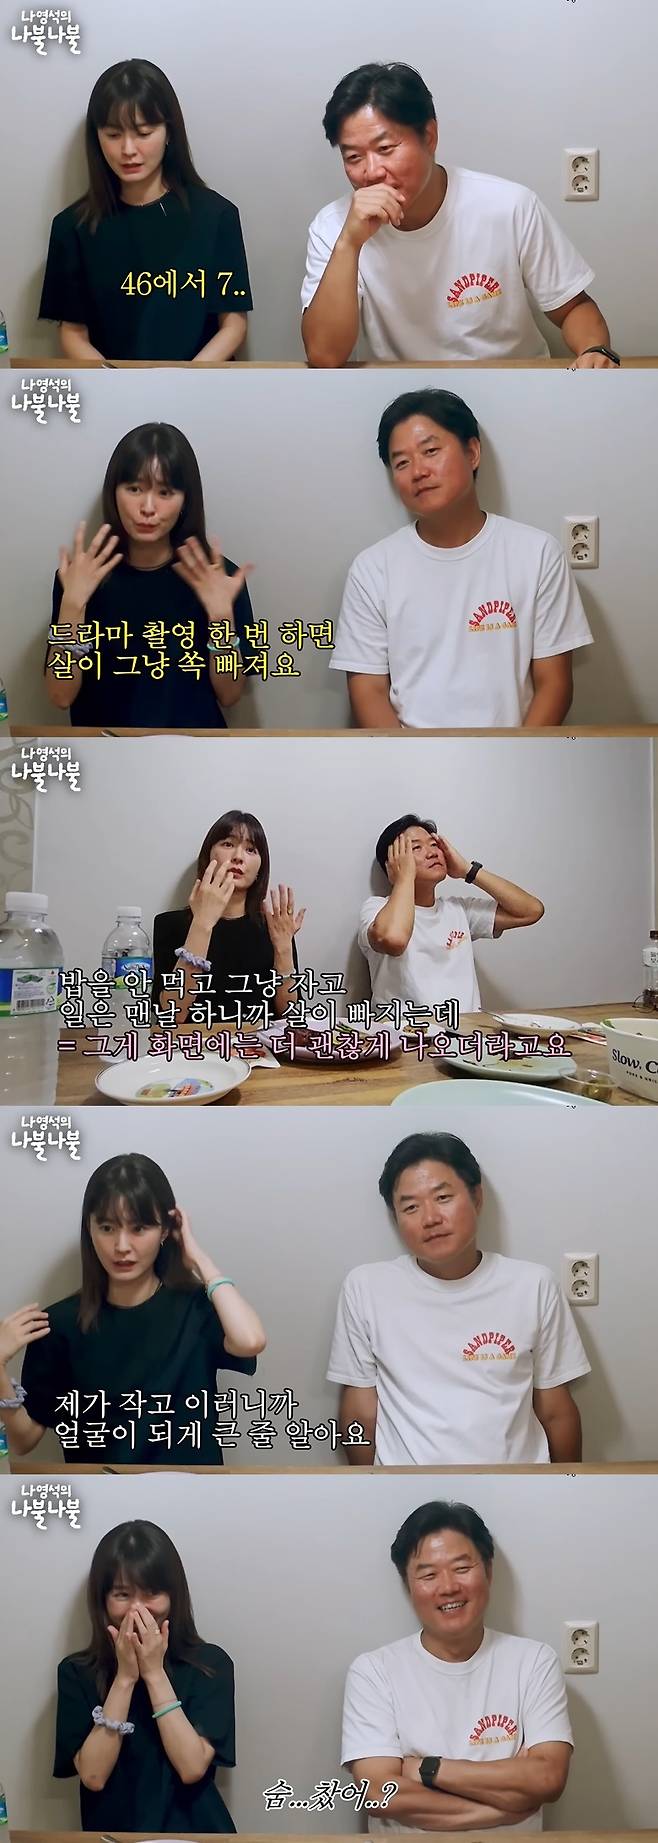 Actor Jung Yu-mi has revealed that 47 kilograms is the biggest weight in her life.On September 1,  ⁇  Communication channel Twelve  ⁇  Communication channel was released with a video titled  ⁇   ⁇   ⁇   ⁇   ⁇  and  ⁇   ⁇   ⁇   ⁇   ⁇ .In the video, Na Young-seok asked, Are you nervous if you do not do anything? I asked if I did not take a photo shot and rested for a month or two.Jung Yu-mi said, I am a little crazy about exercise. At one point, I thought I became obsessive. I was a photographer during my all-night days.When I did not do Photo shot, I thought I could not do it at all. I did it when I did not have Photo shot. There were times when I did three exercises a day.Since I was sick, I could not do it, so I was a little nervous.People dont know that I work out this much. I think Im skinny, but I keep working out, so I think I stay this way, he added.When asked when he was the fattest person in his life, Jung Yu-mi said, It was too hard for me to carry me around when I could go out. It was 46kg to 47kg.Na Young-seok PD also said that the whole country is sulking now.Jung Yu-mi said, I lose weight once I do the TV drama Photo shot. I like to sleep rather than eat, so I sleep unconditionally when I have time. I lose weight because I work all the time, but it looks better on the screen.I know that my face is big because I am small. Lee Woo-jung said, You have a small face. Do you want to be hit by your sister?When asked what was difficult in the days of  ⁇  46 ~ 47kg, Jung Yu-mi replied, I was just out of breath. Na Young-seok PD joked that it was an old sports newspaper headline.